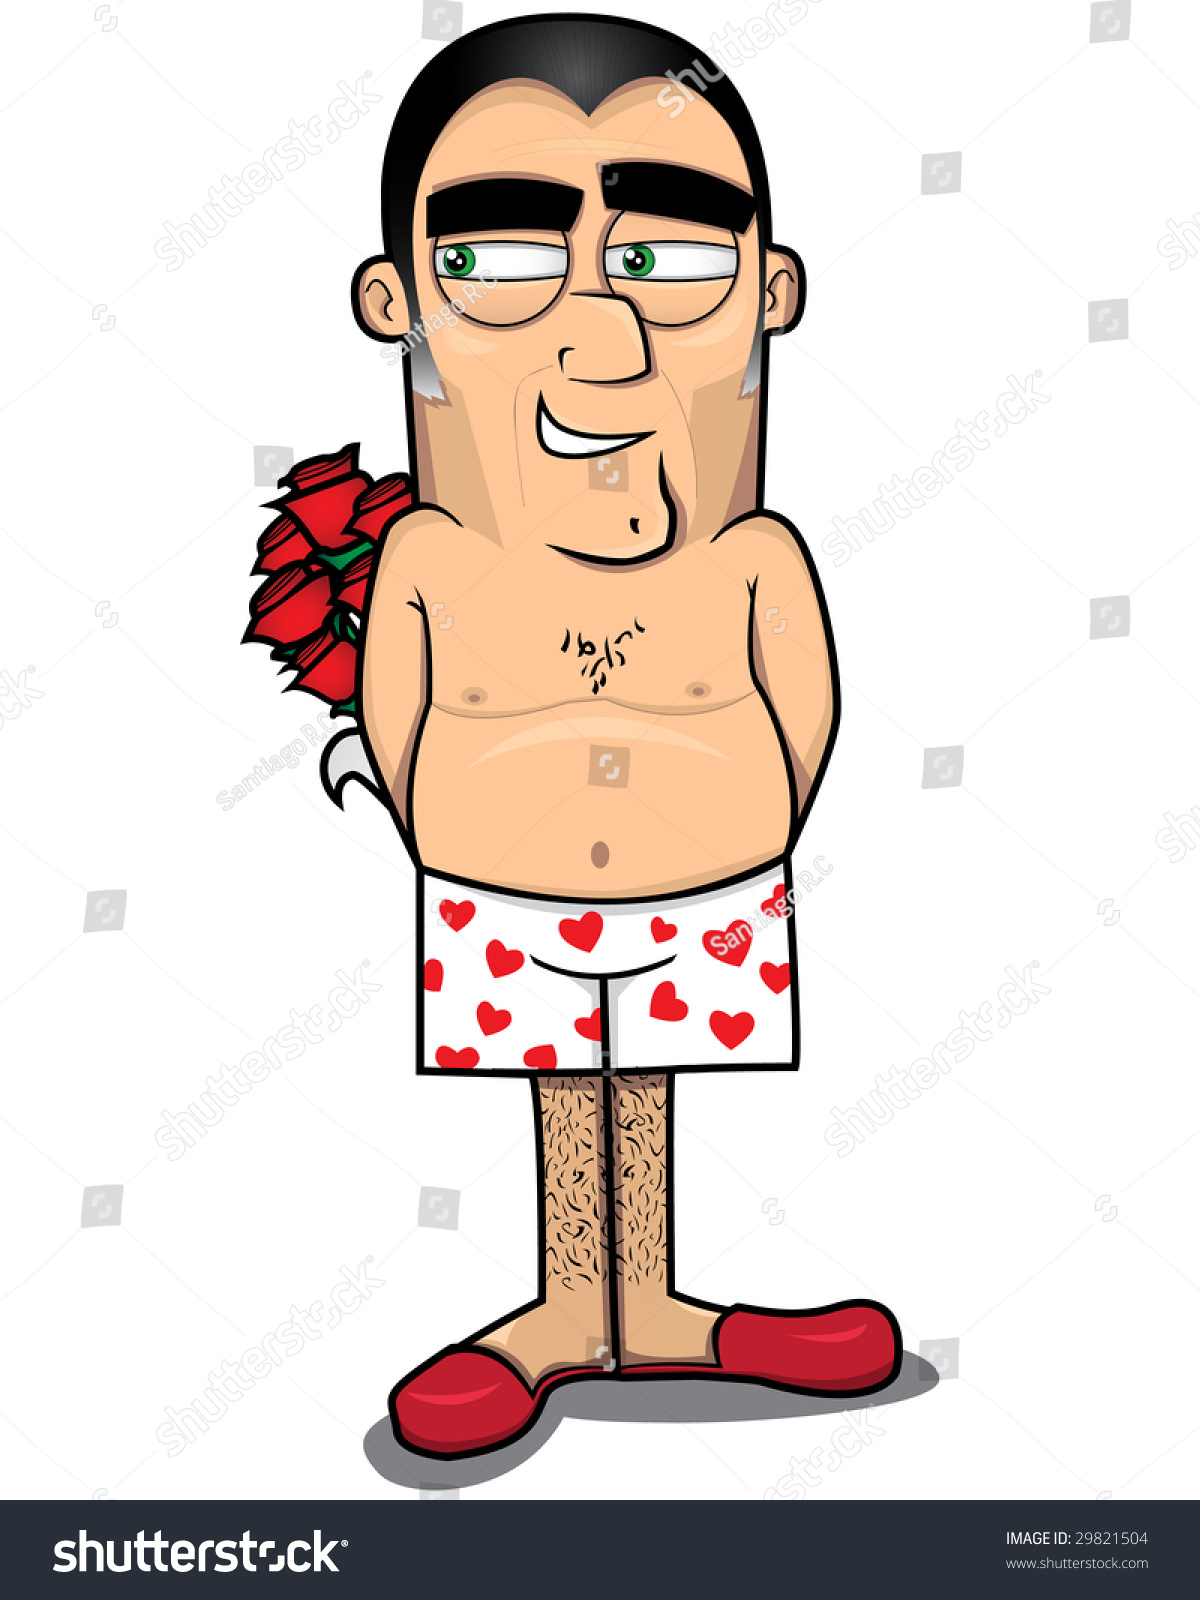 stock-vector-cartoon-illustration-of-naked-guy-with-roses-and-heart-boxers-the-roses-are-in-a-different-layer-29821504.jpg